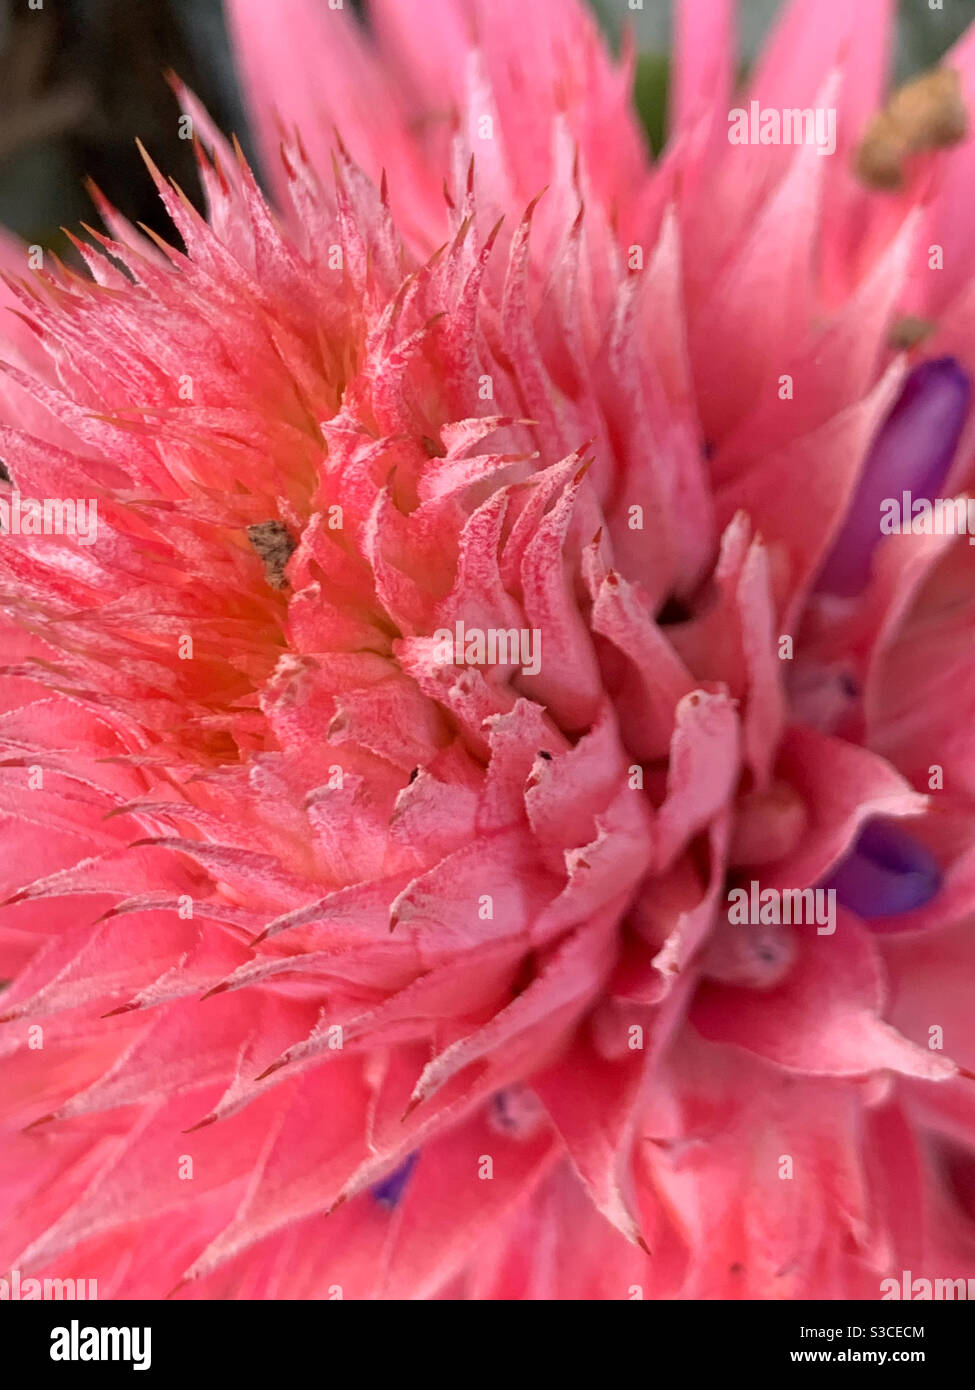 Macro of a stunning pink Bromeliad flower, Aechmea fasciata, with many spiky looking petals Stock Photo